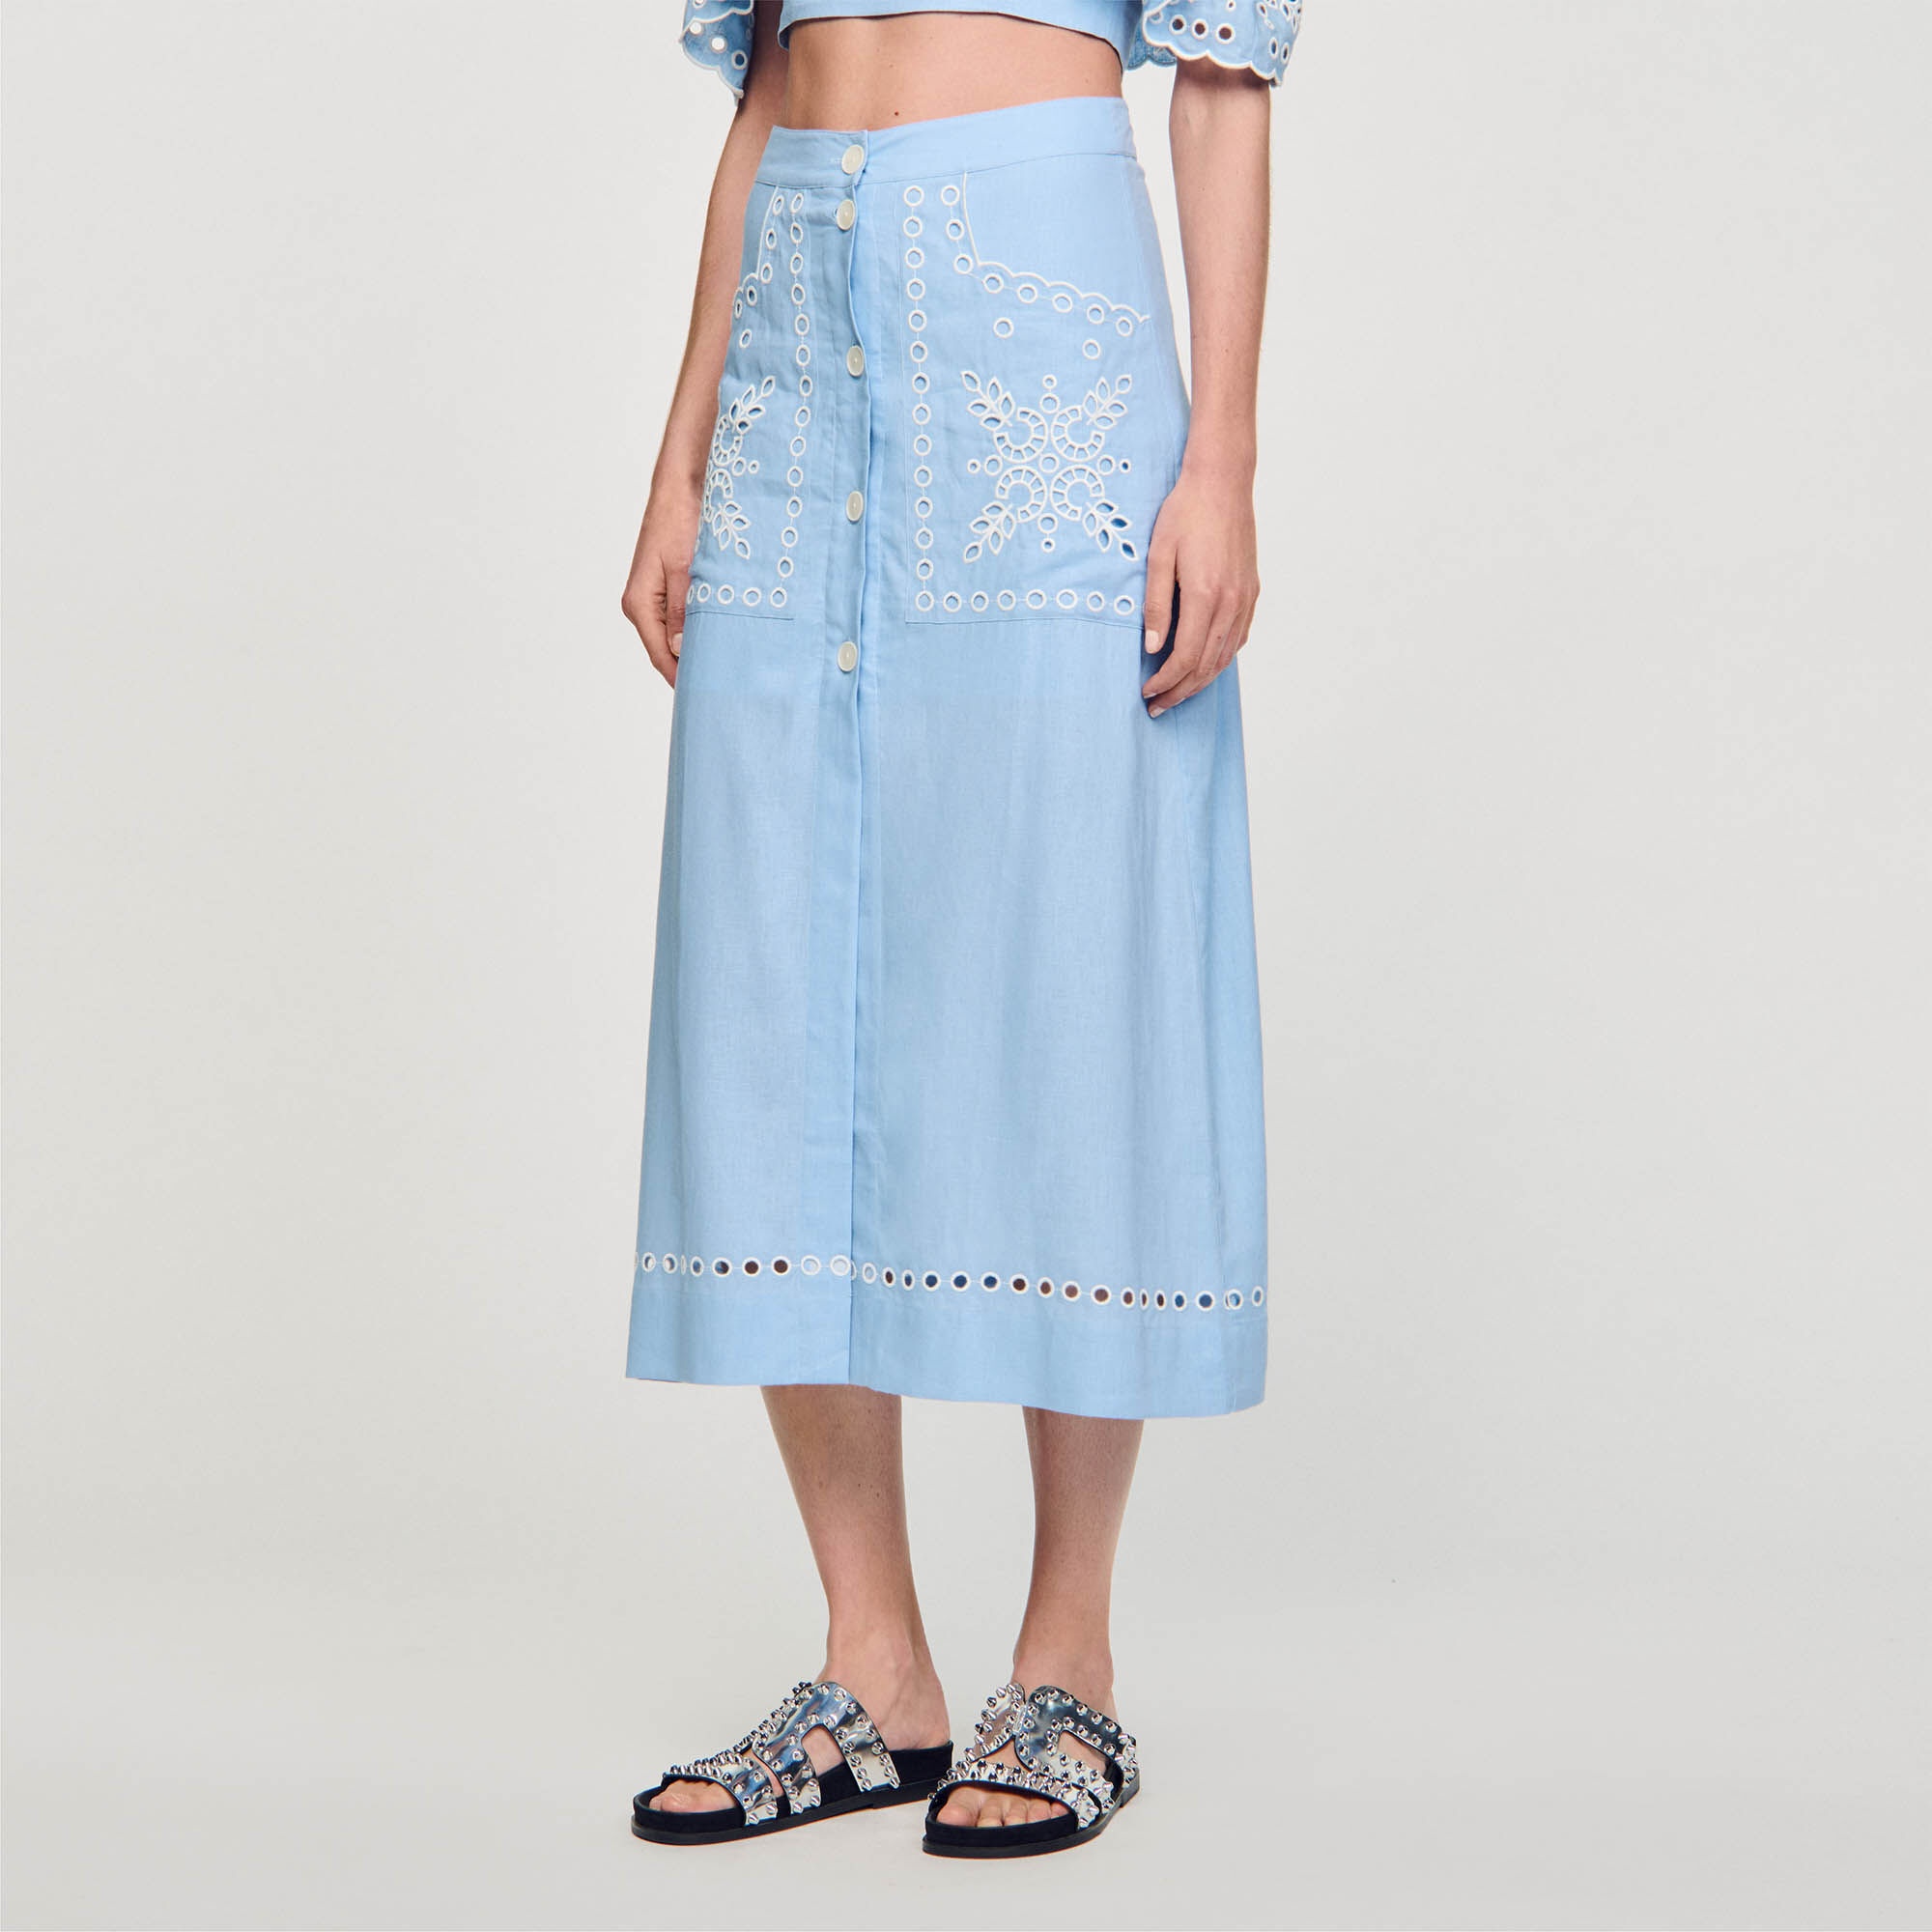 EMBROIDERED MAXI SKIRT - 5